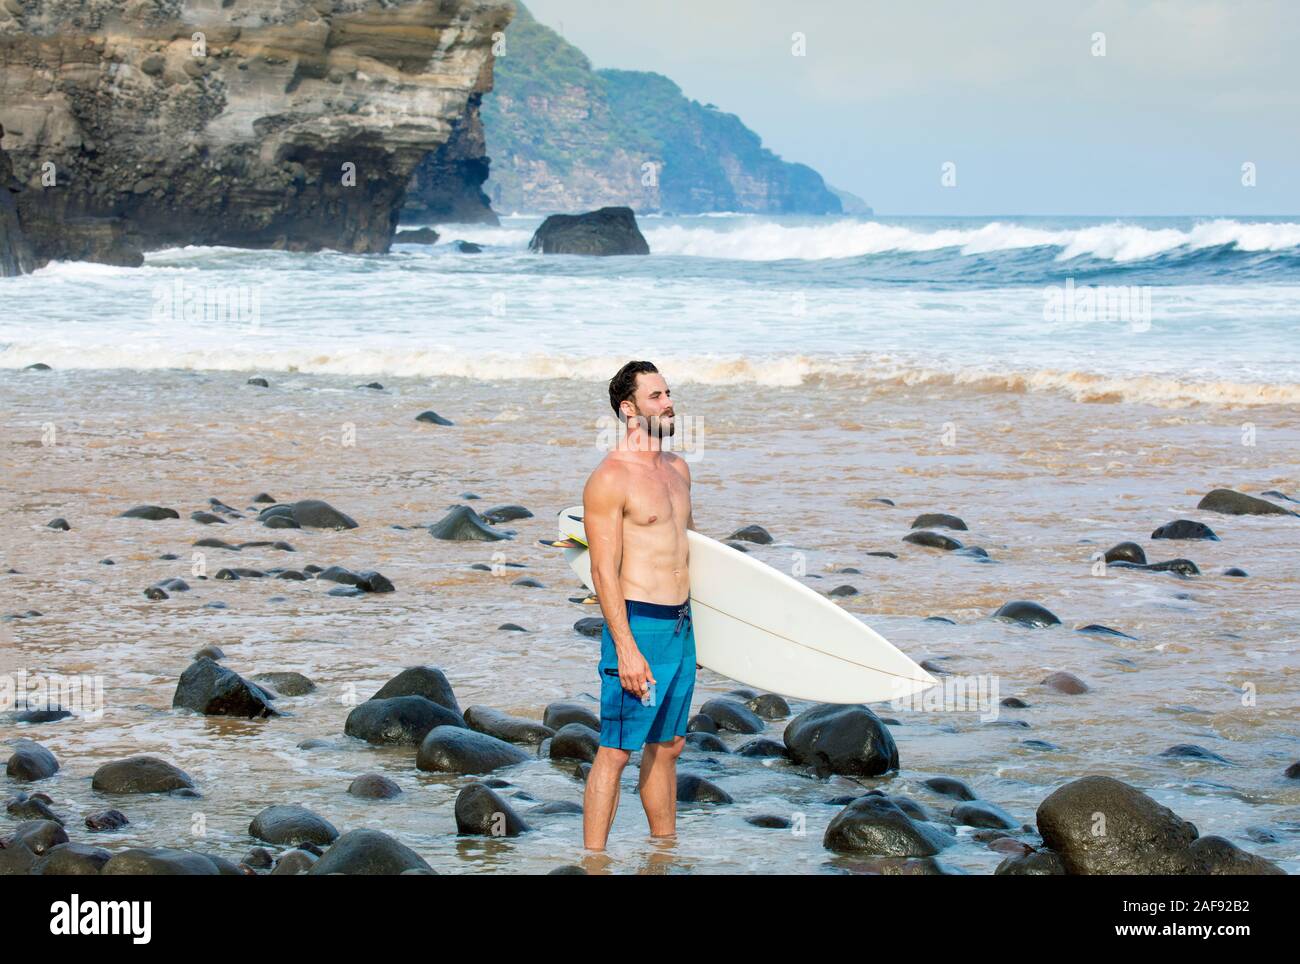 A young male surfer on a Pacific coast beach in El Salvador, Central America Stock Photo